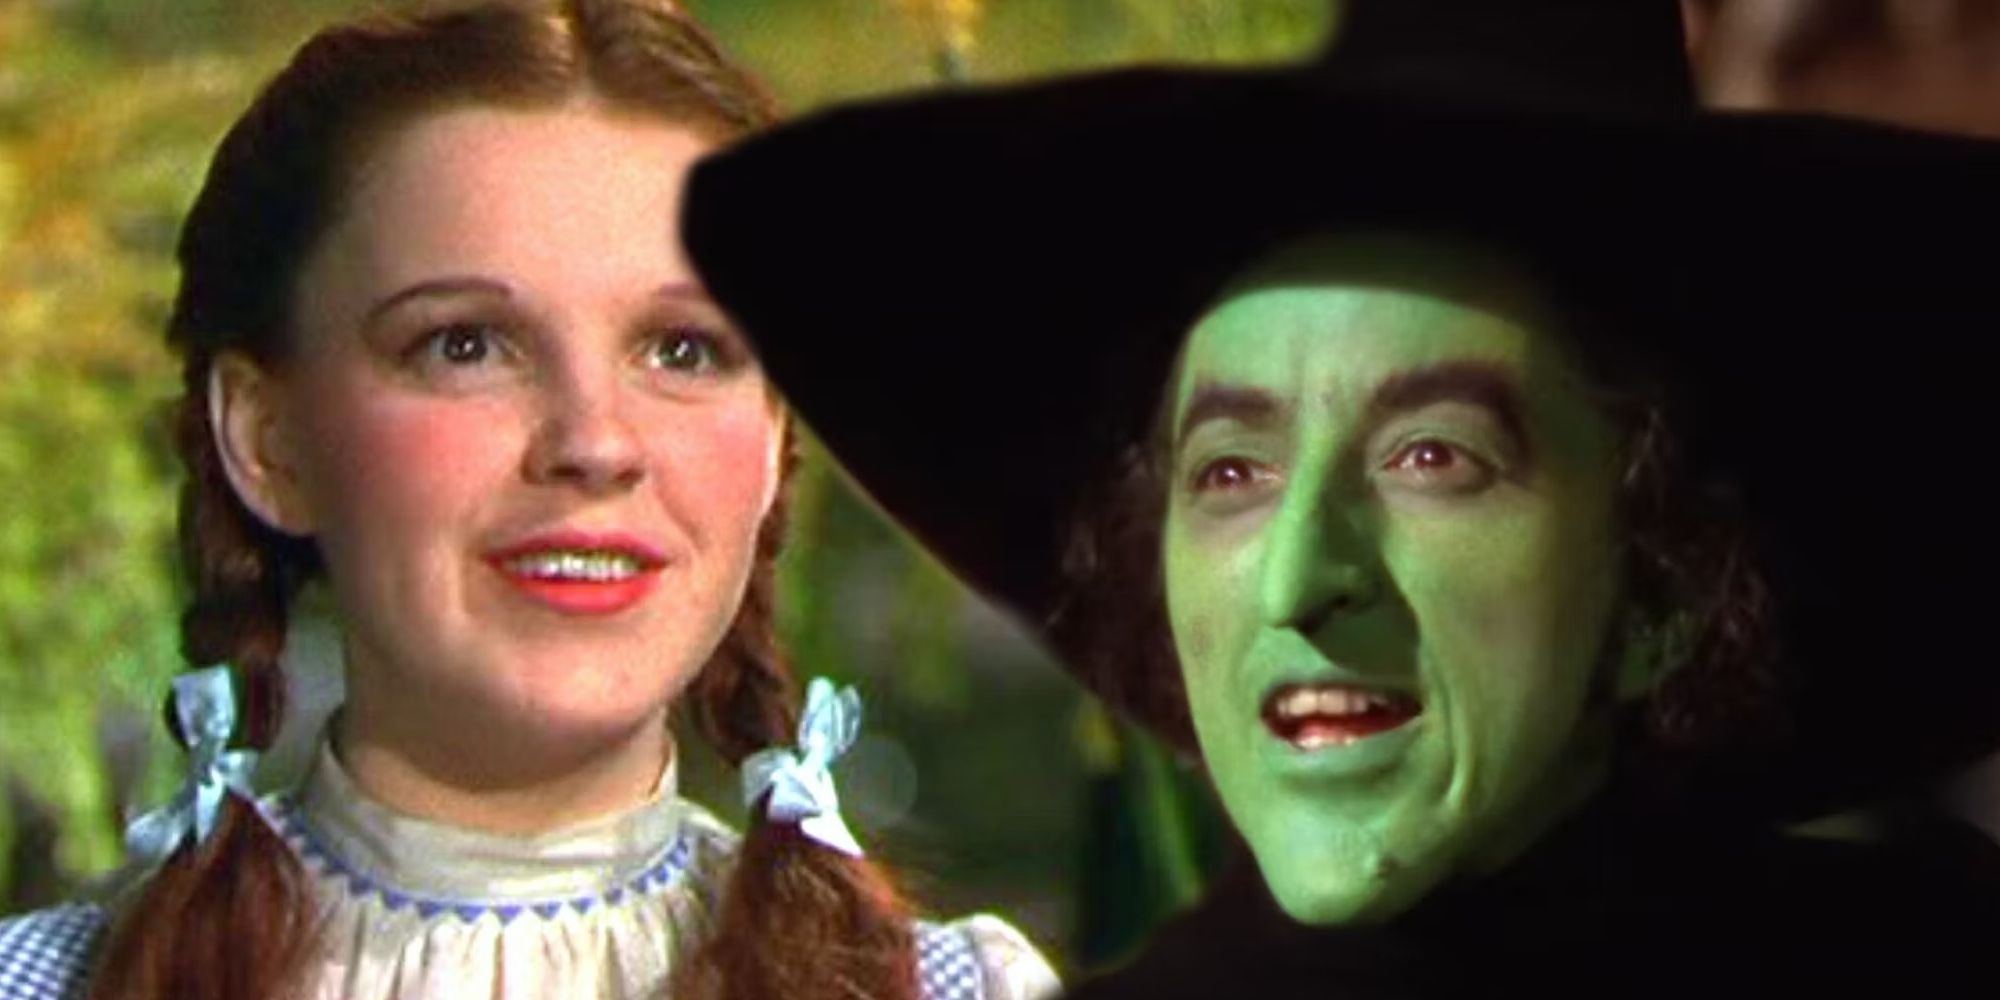 Judy Garland as Dorothy and Margaret Hamilton as the Wicked Witch of the West in The Wizard of Oz (1939)